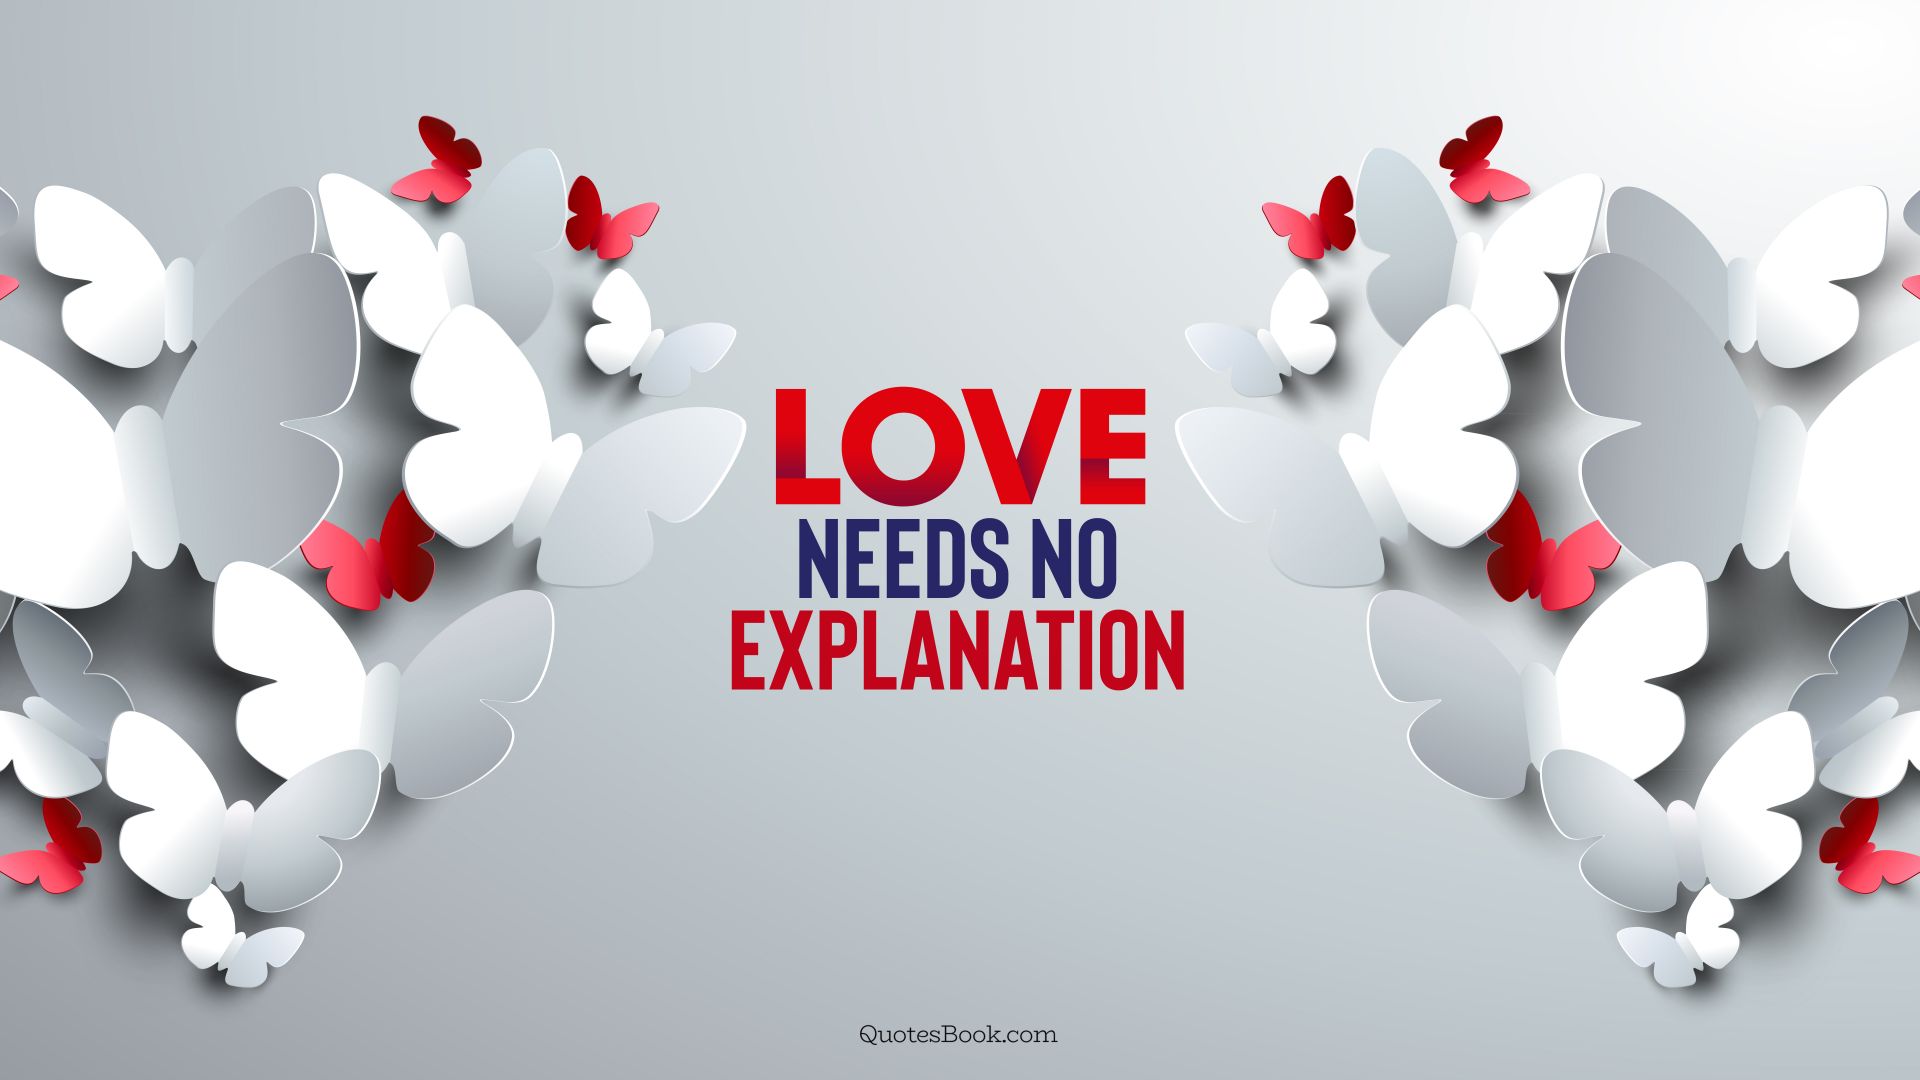 Love needs no explanation. - Quote by QuotesBook